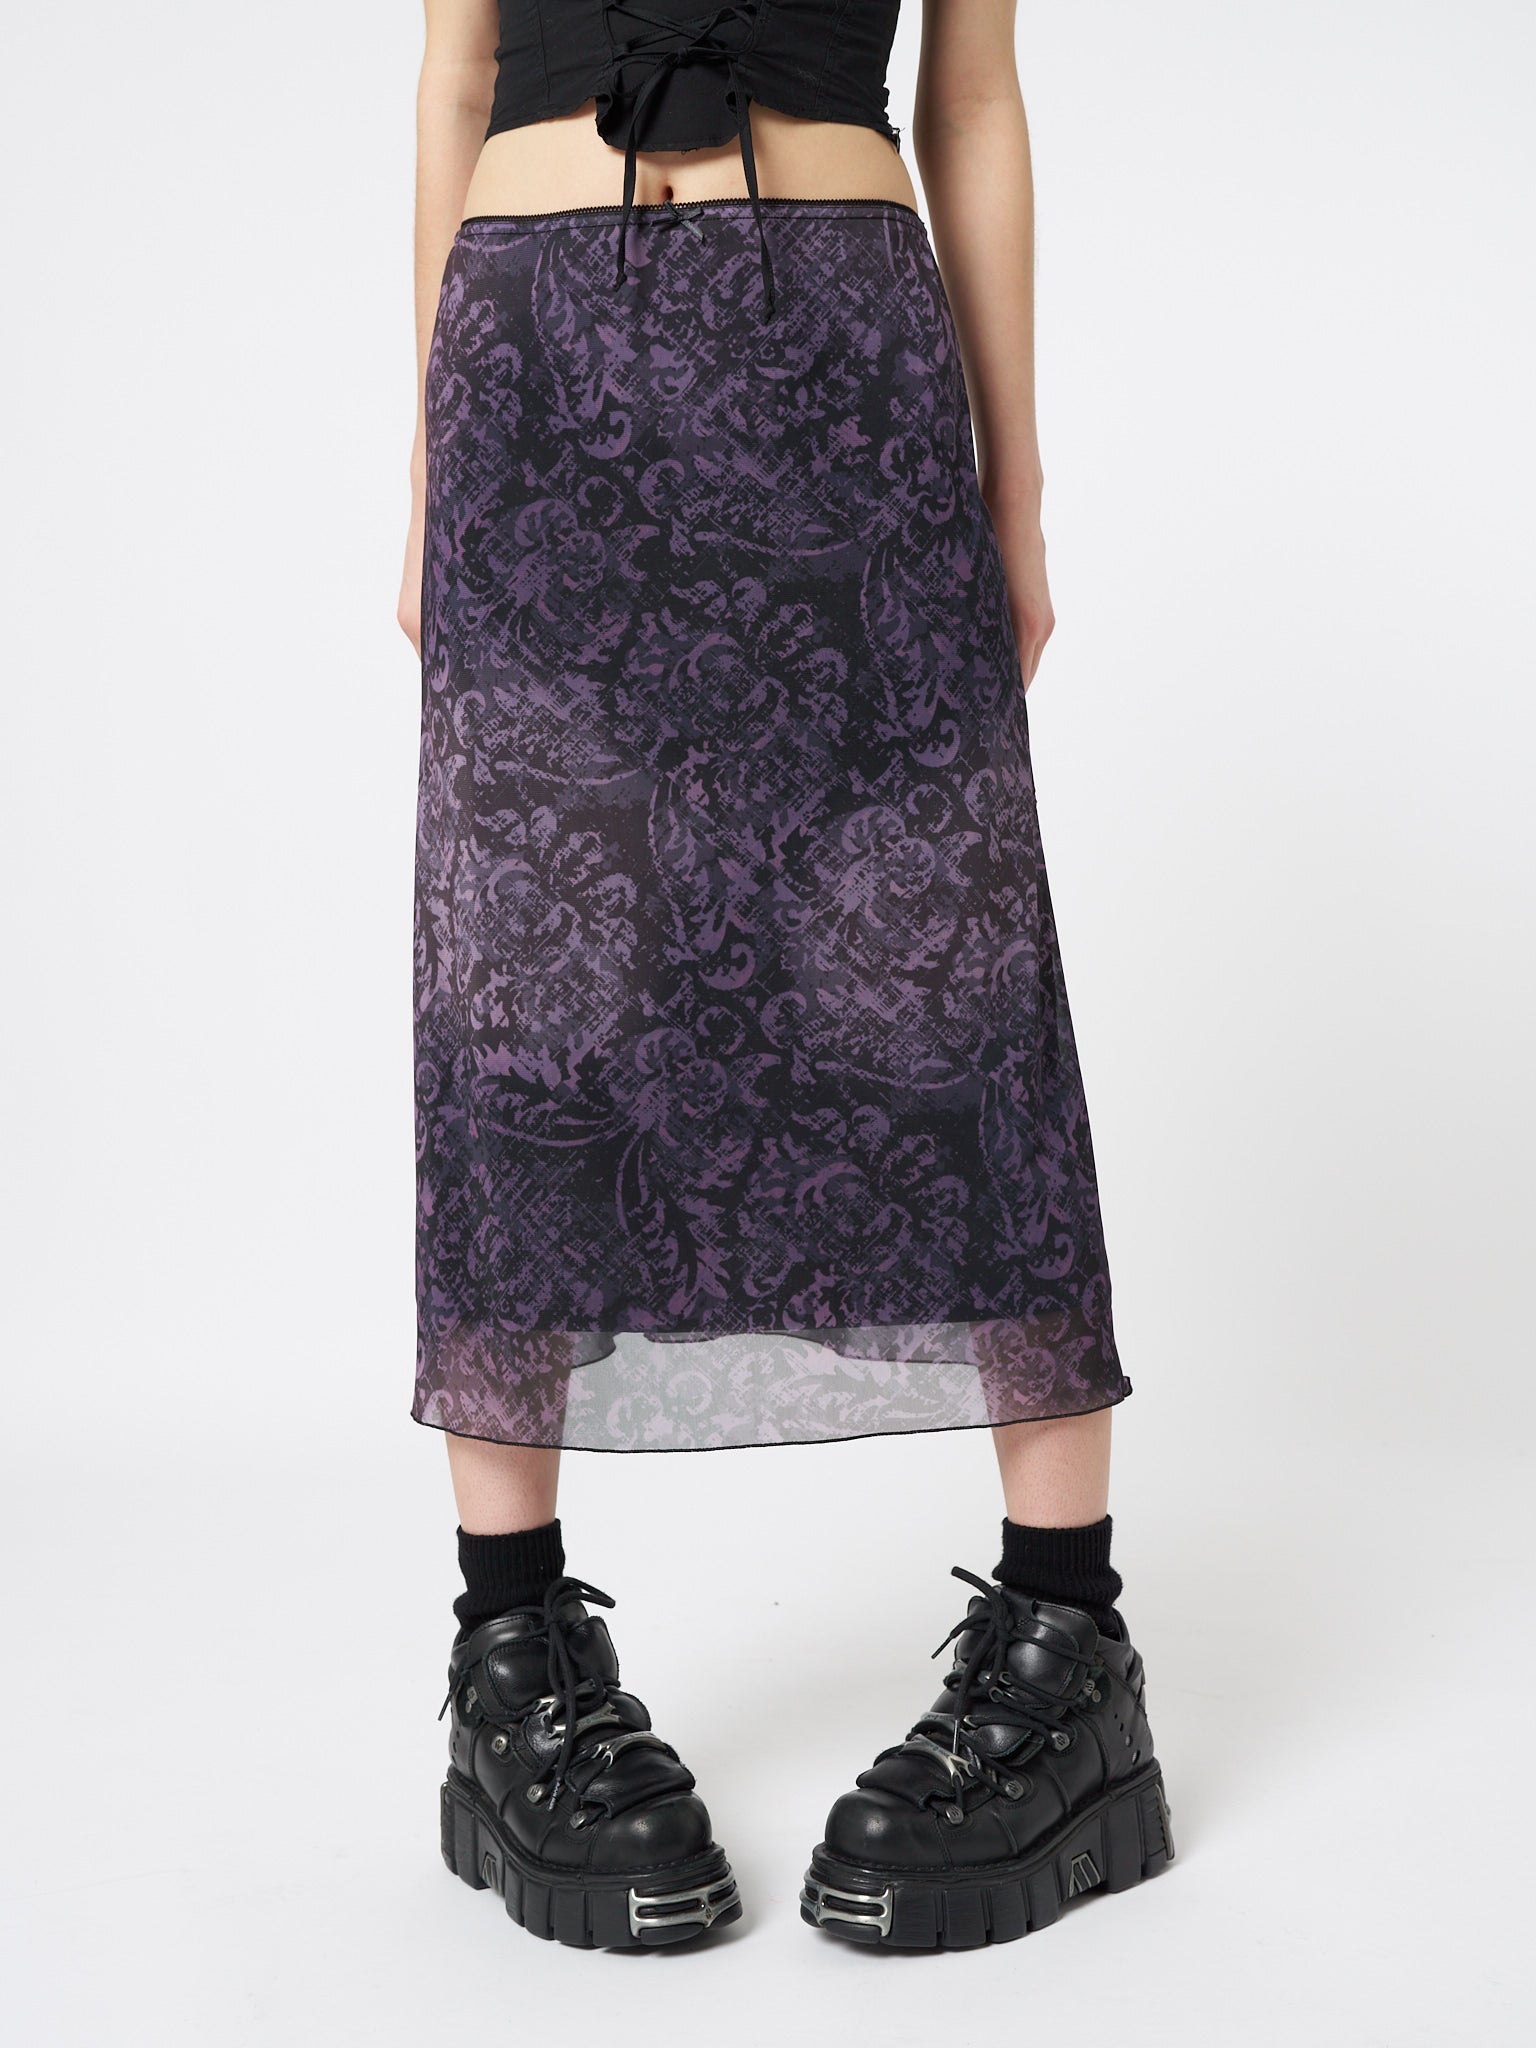 A stunning purple mesh midi skirt adorned with intricate floral prints, capturing the essence of a dark renaissance.